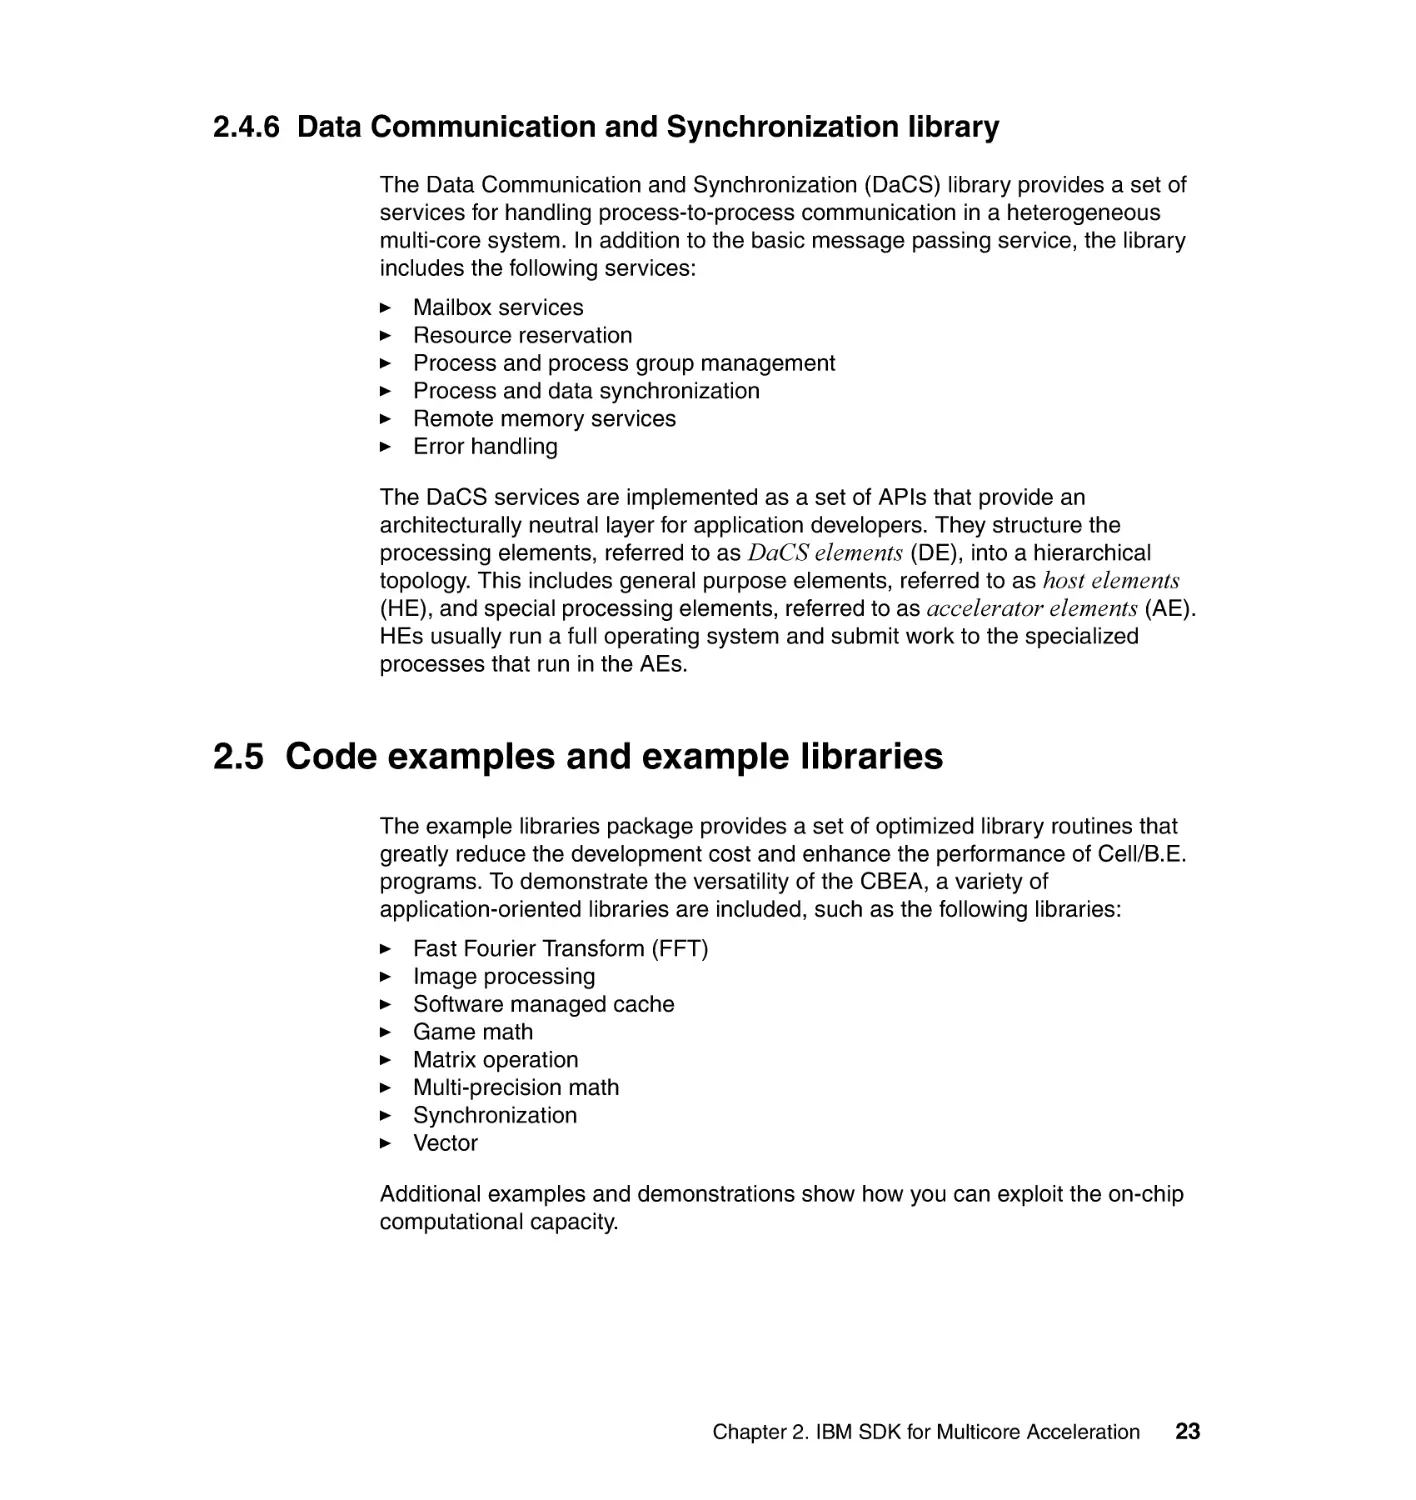 2.4.6 Data Communication and Synchronization library
2.5 Code examples and example libraries